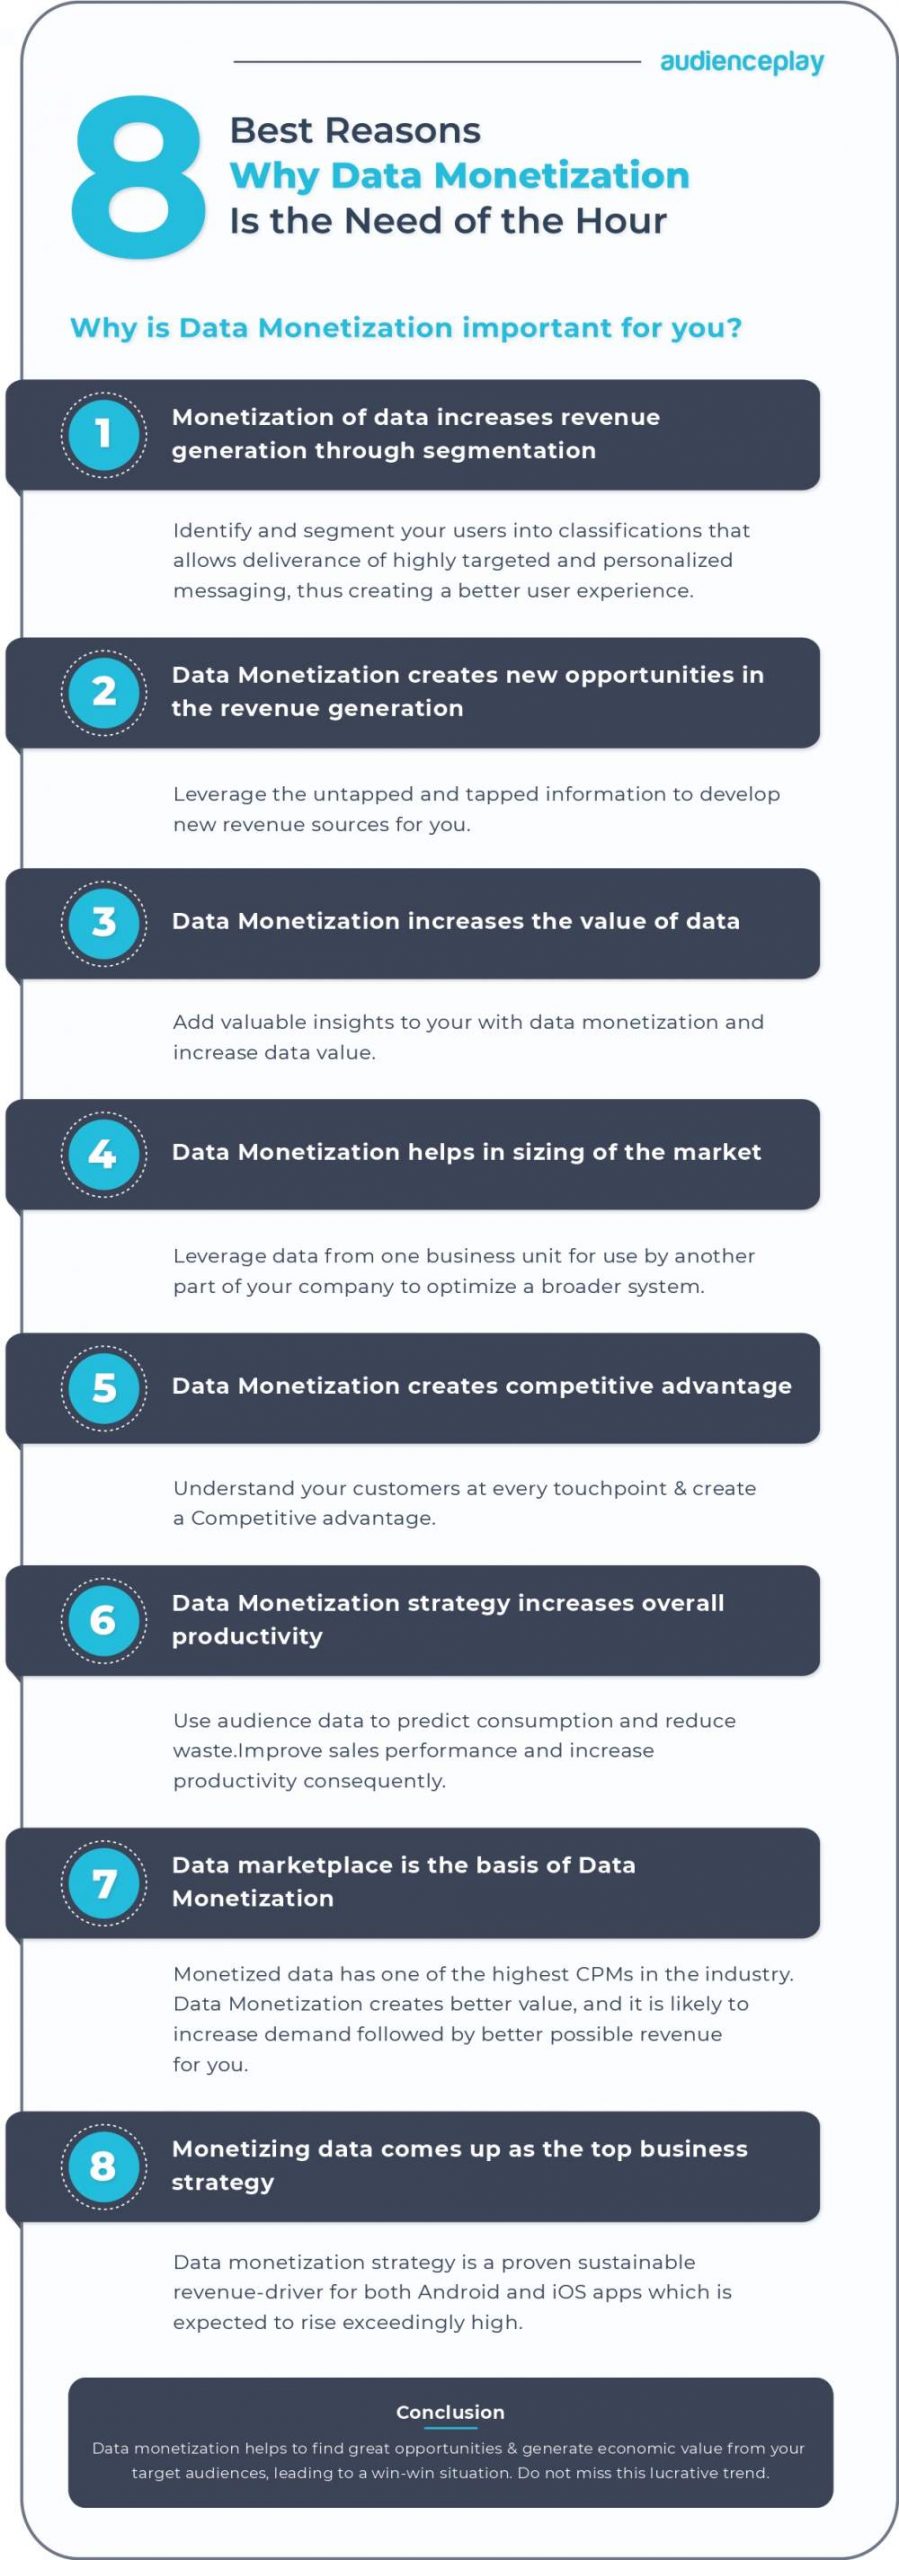 why data monetization is the need of the hour